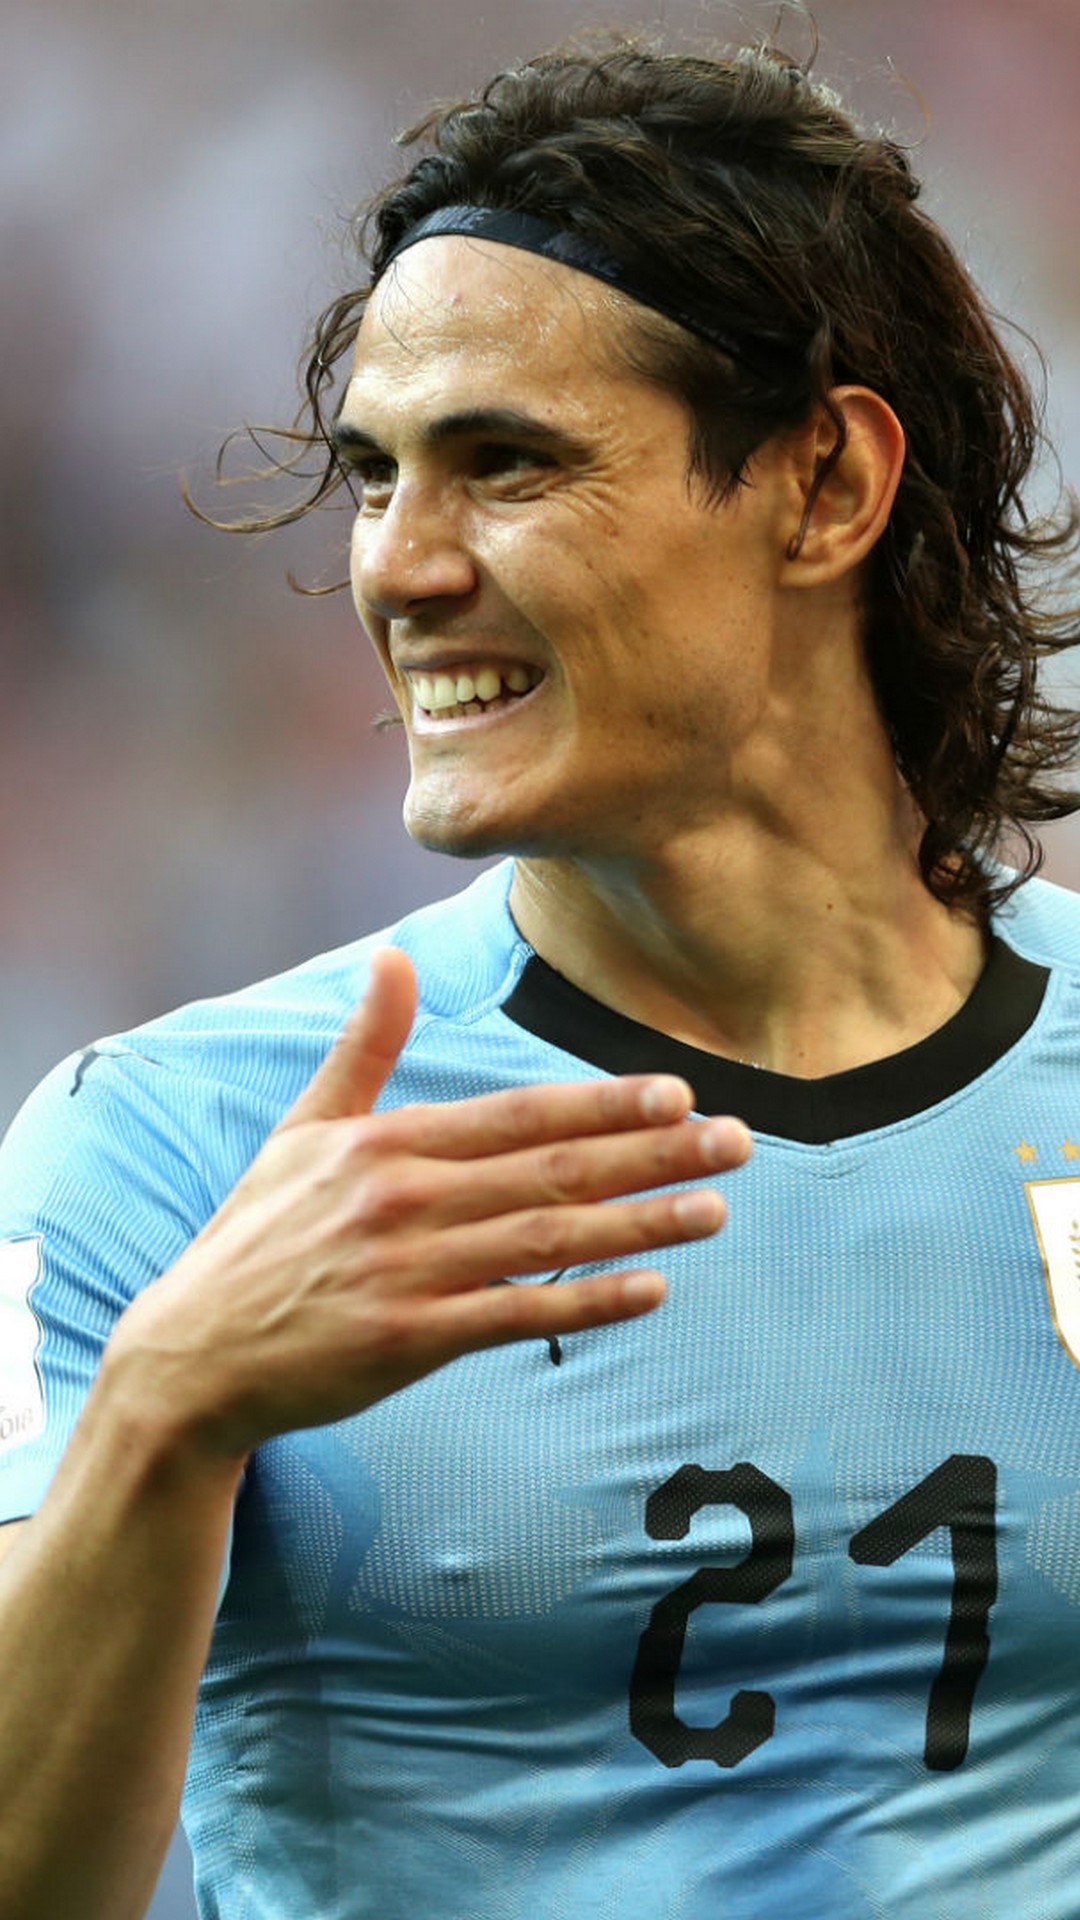 Edinson Cavani Uruguay iPhone Wallpaper with image resolution 1080x1920 pixel. You can make this wallpaper for your iPhone 5, 6, 7, 8, X backgrounds, Mobile Screensaver, or iPad Lock Screen